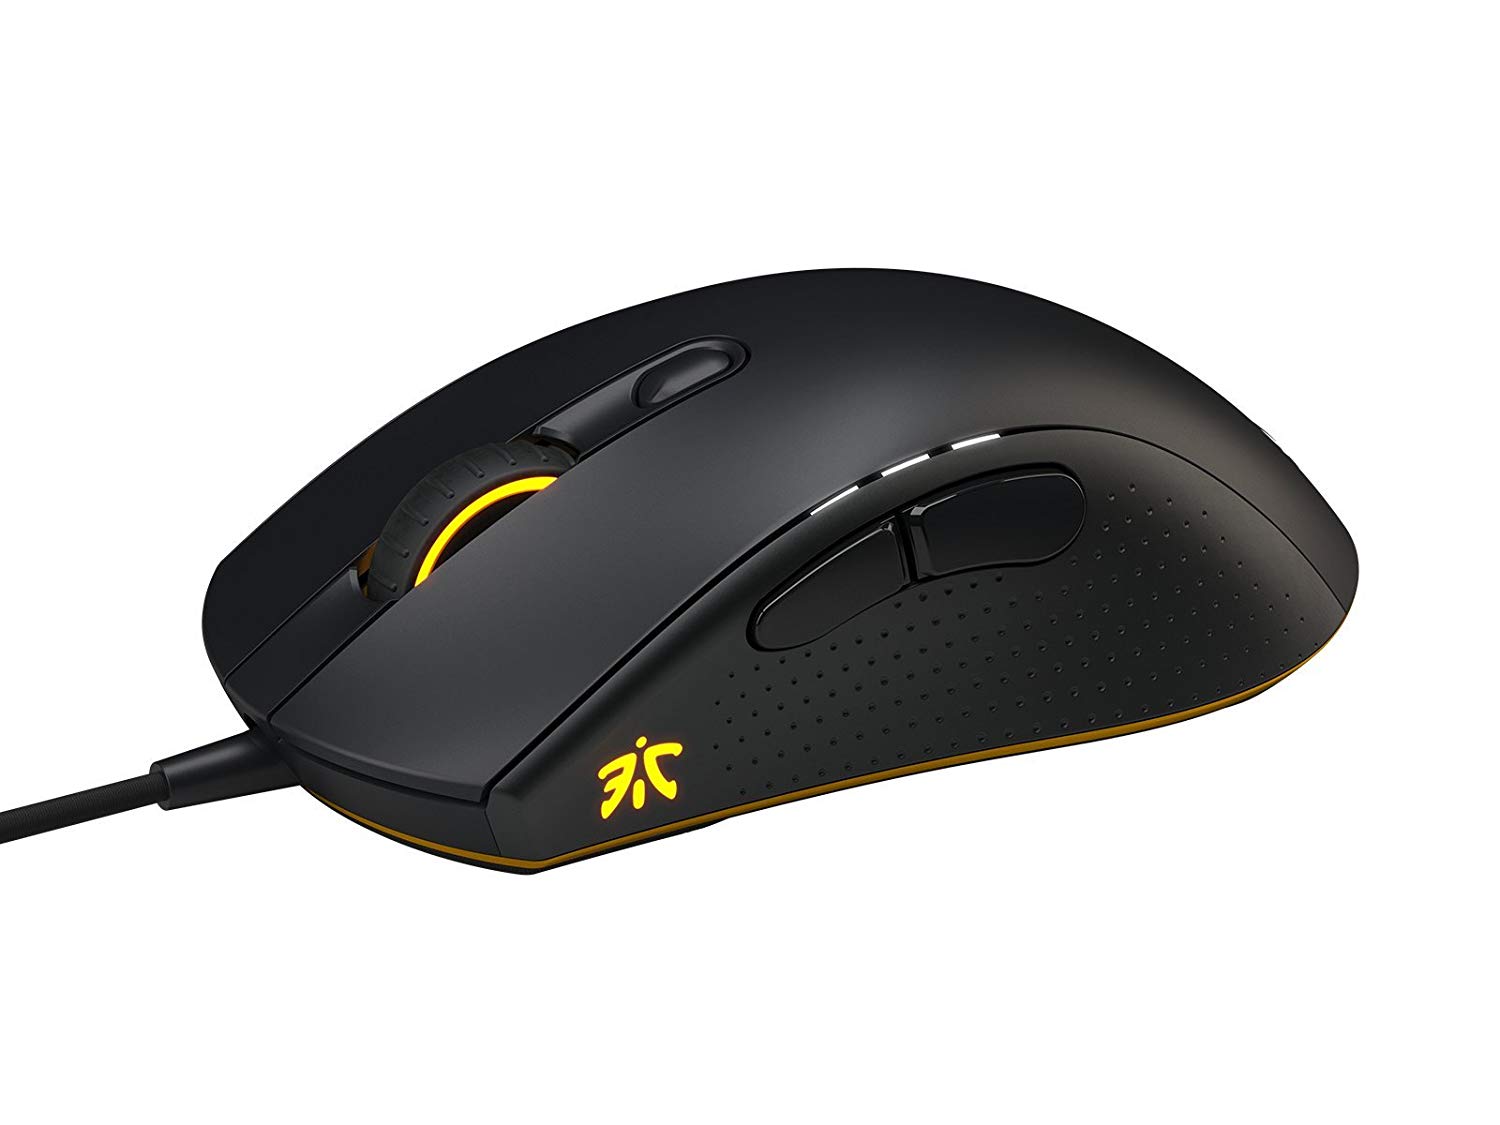 FNATIC GEAR FLICK 2 WIRED SYMMETRICAL GAMING MOUSE - FNC-FLICK-2-N